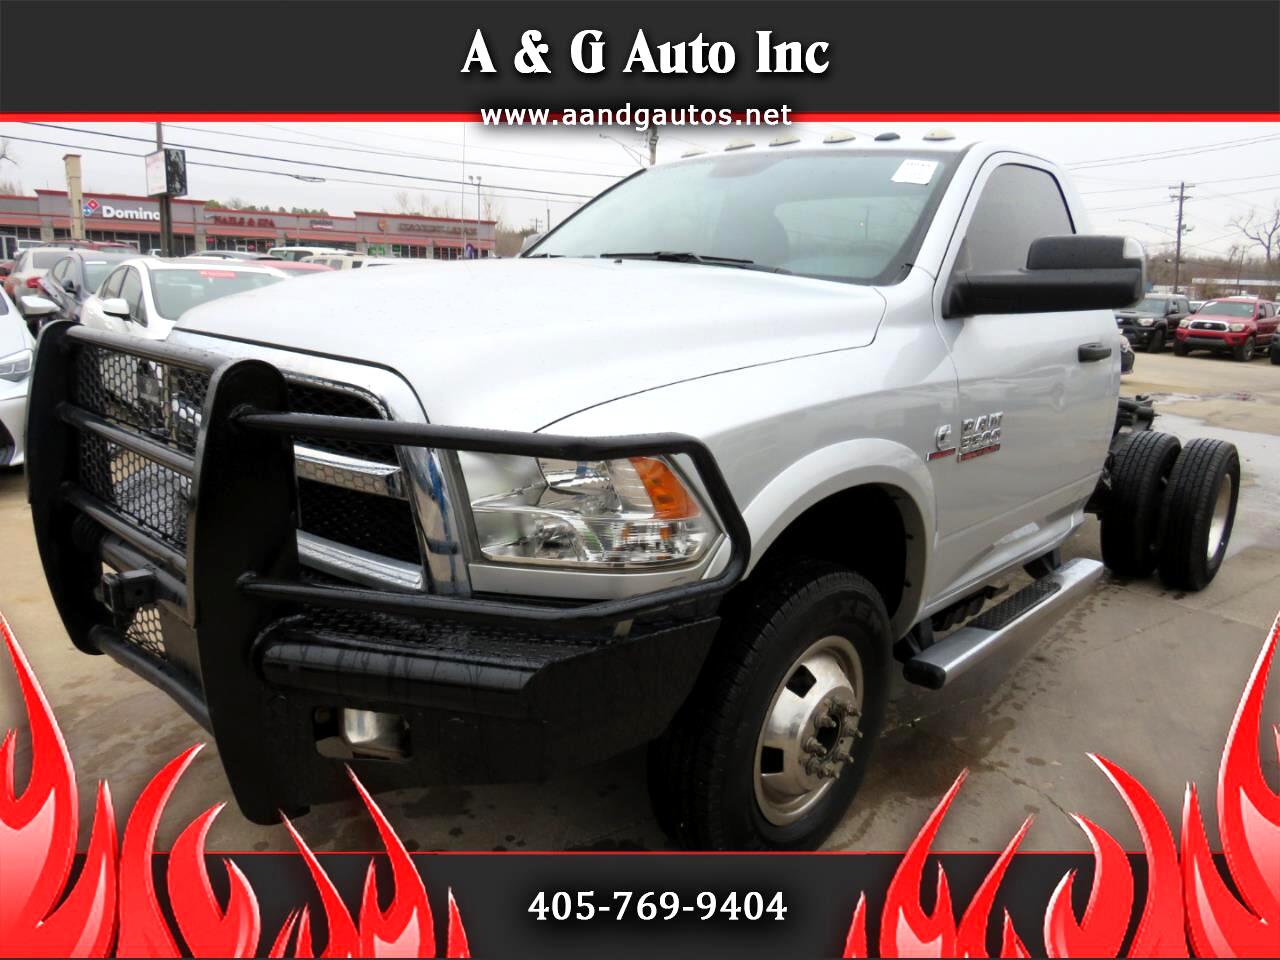 2017 Dodge Ram 3500 for sale in Oklahoma City OK 73141 by A & G Auto Inc